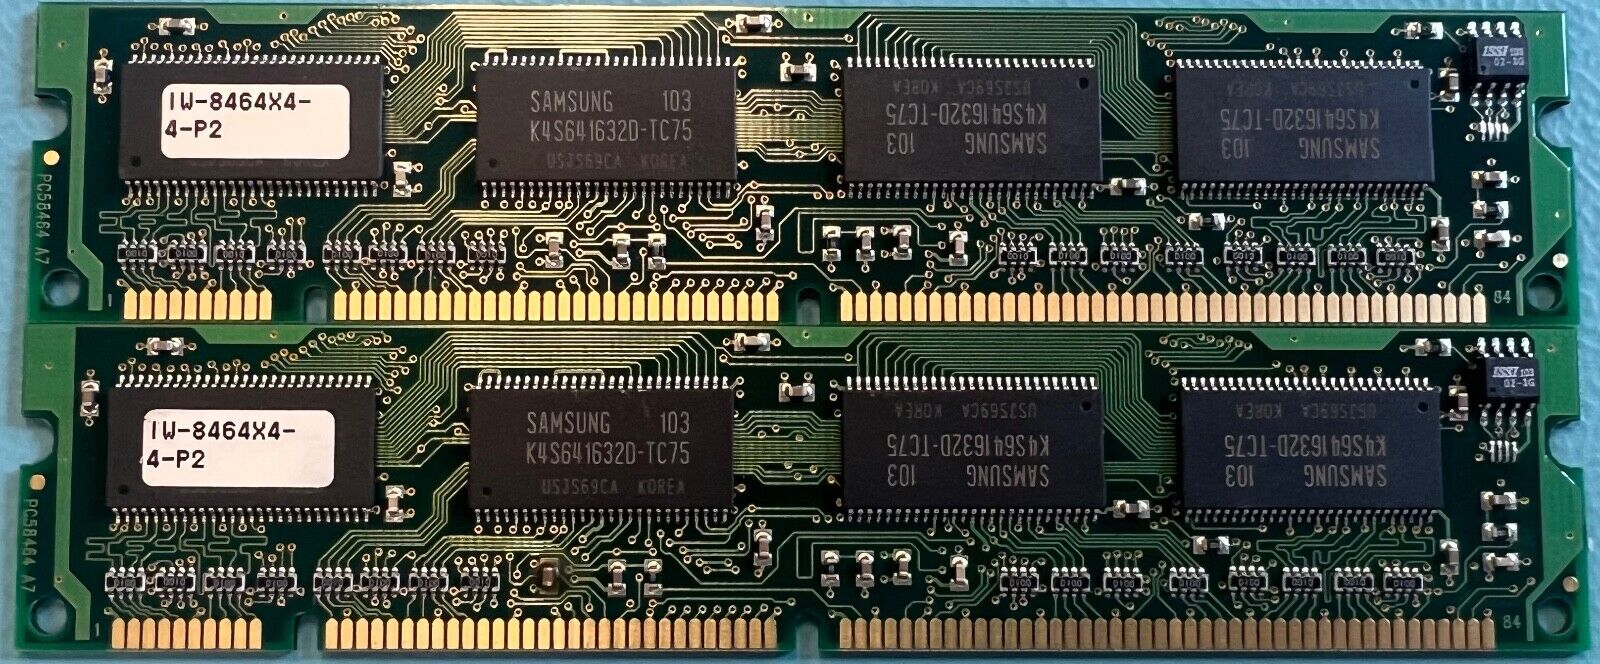 LOT OF 2 Micron 32MB PC100 100MHz CL2 UDIMM Memory Module